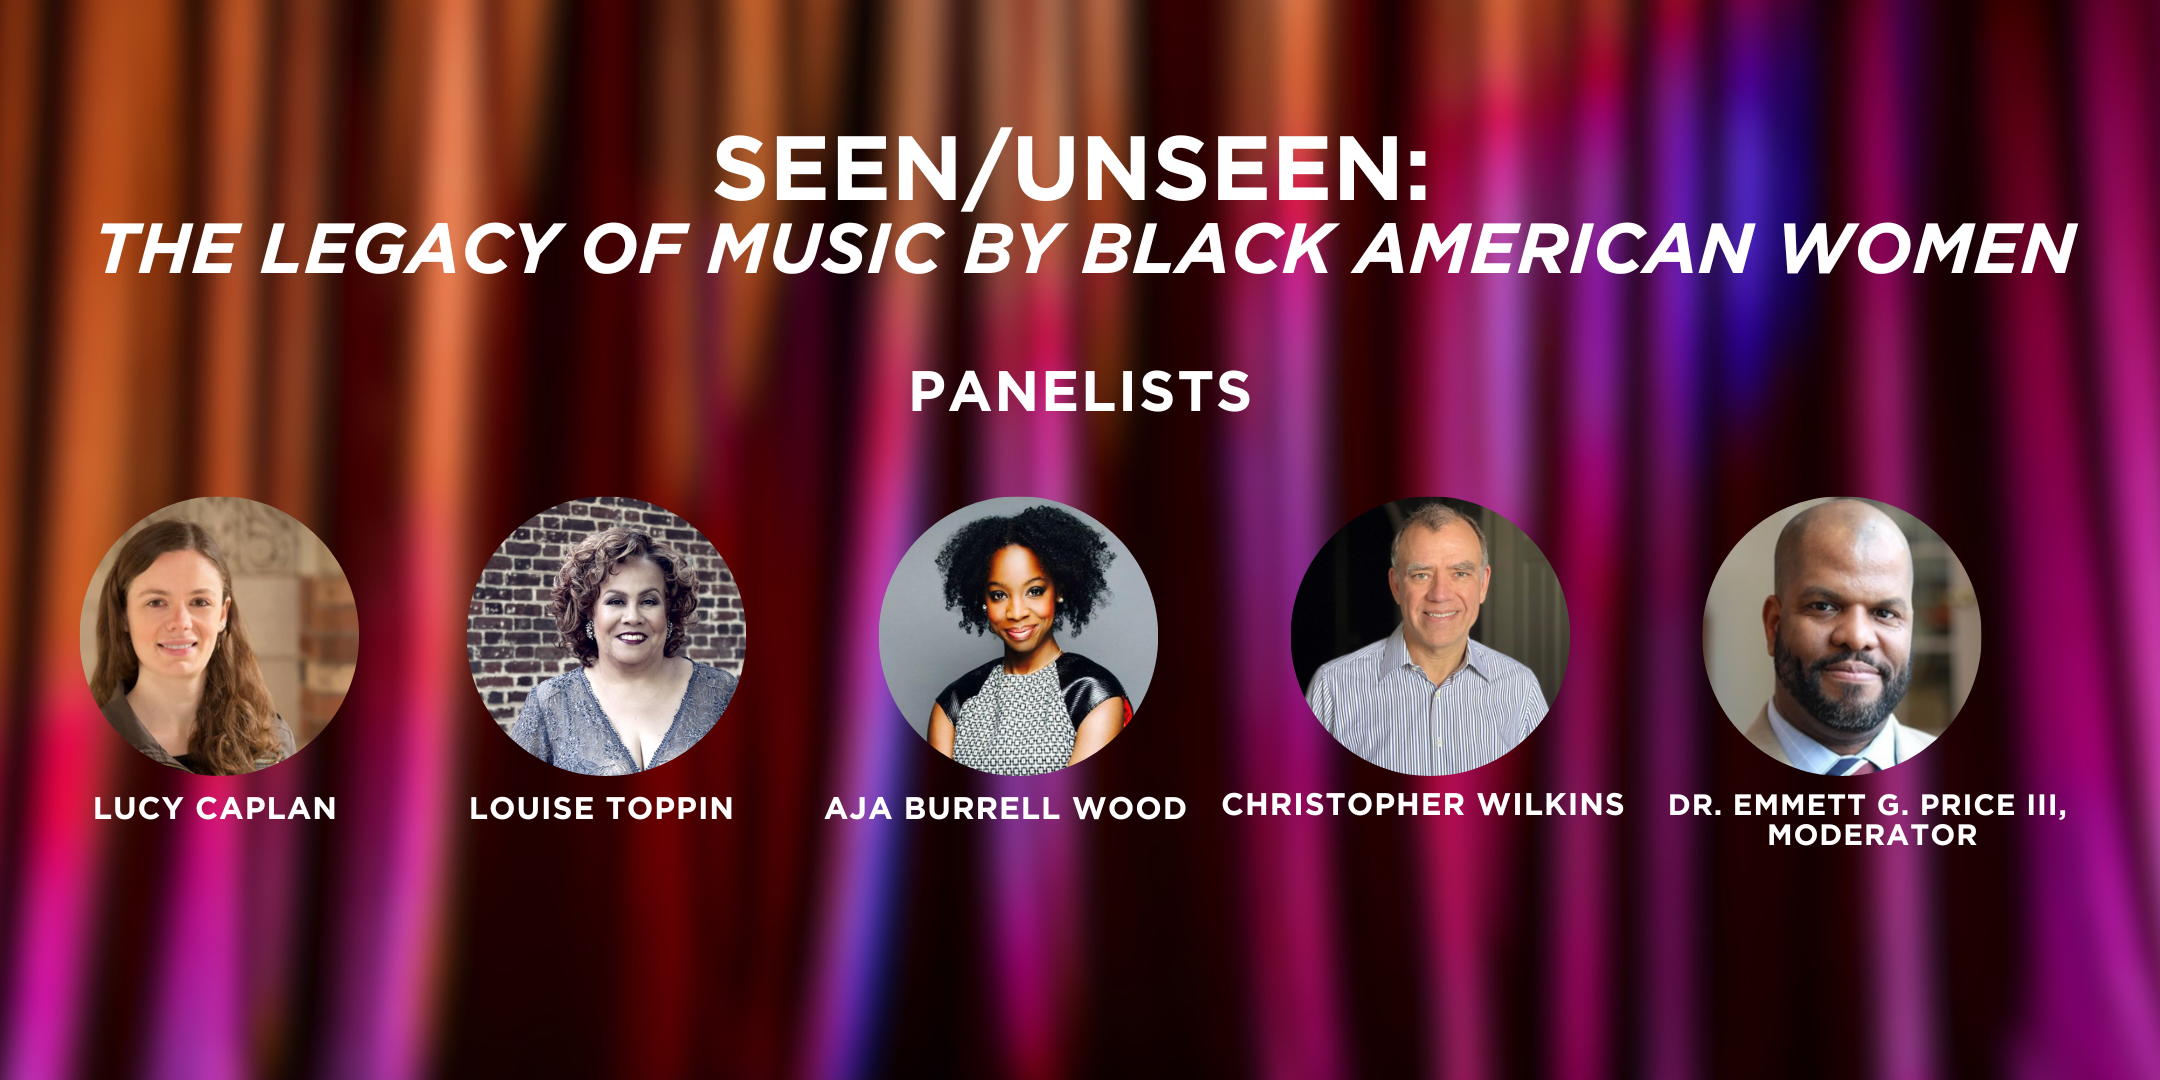 Seen/Unseen: The legacy of music by Black American Women. Featuring panelists, Lucy Caplan, Louise Toppin, Aja Burrell-Wood, Christopher Wilkins, and moderated by Dr. Emmett Price.